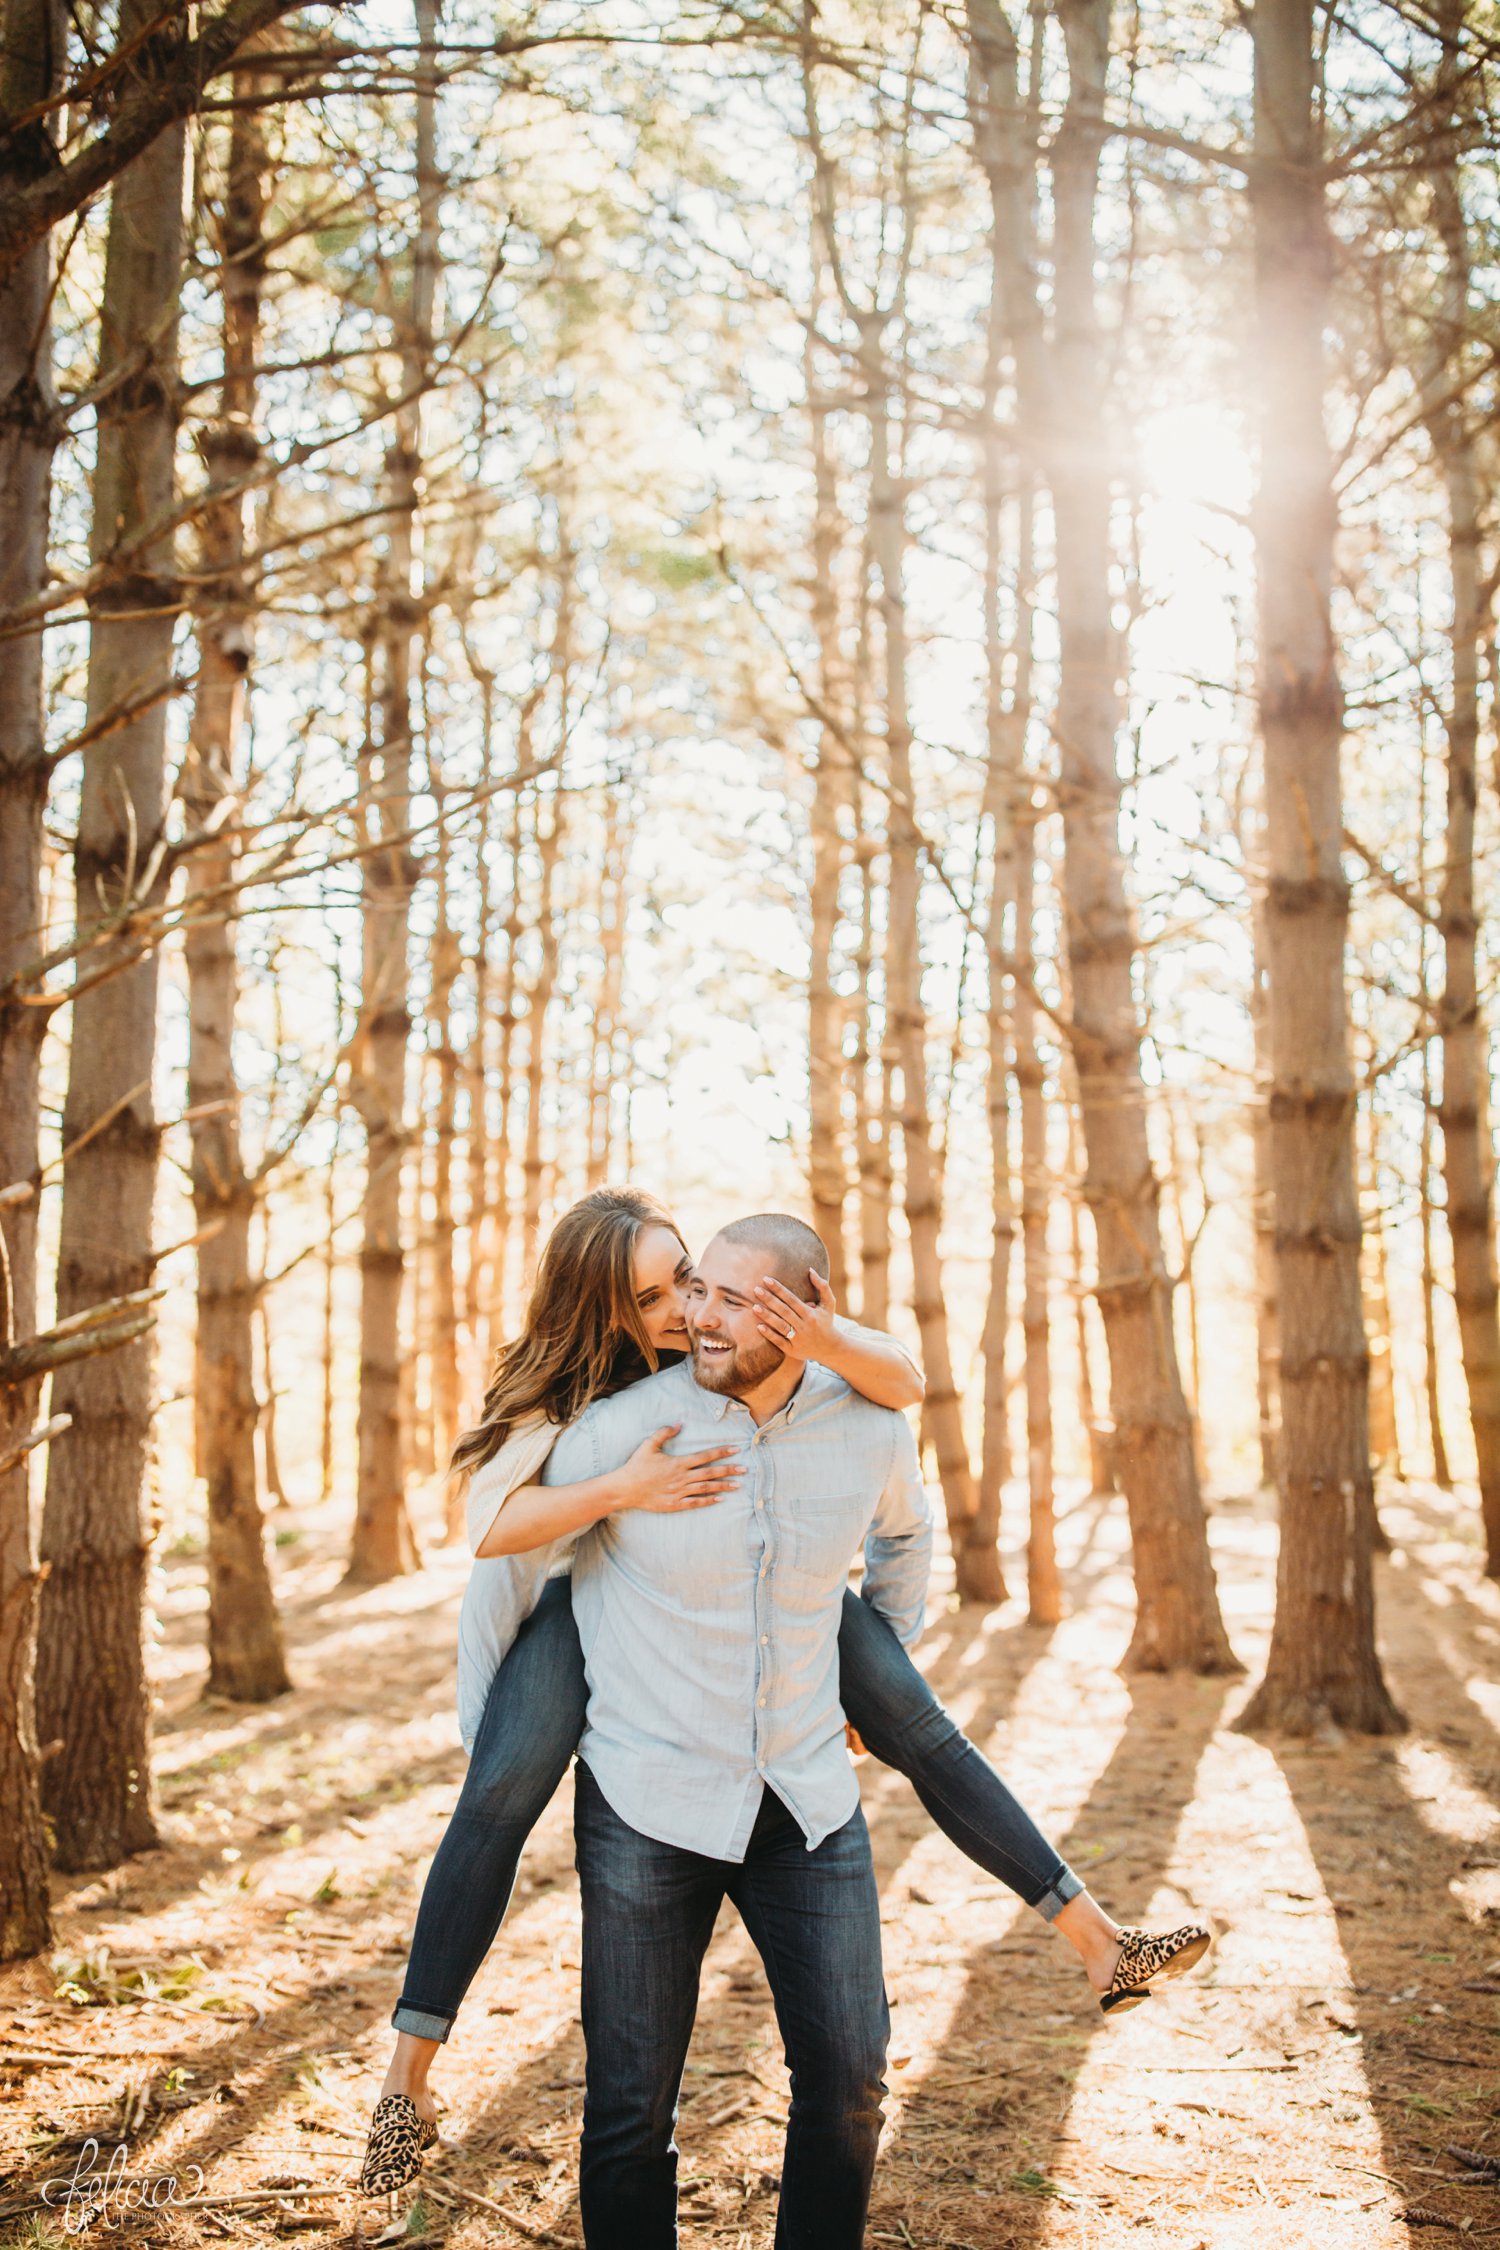 images by feliciathephotographer.com | The Forest | engagement photos | wedding photographer | engagement photographer | forest | sunrise | piggy back ride | tall trees | smiling | candid | posing | posed | wedding ring | cheetah print shoes | blue jeans | love | happy | 